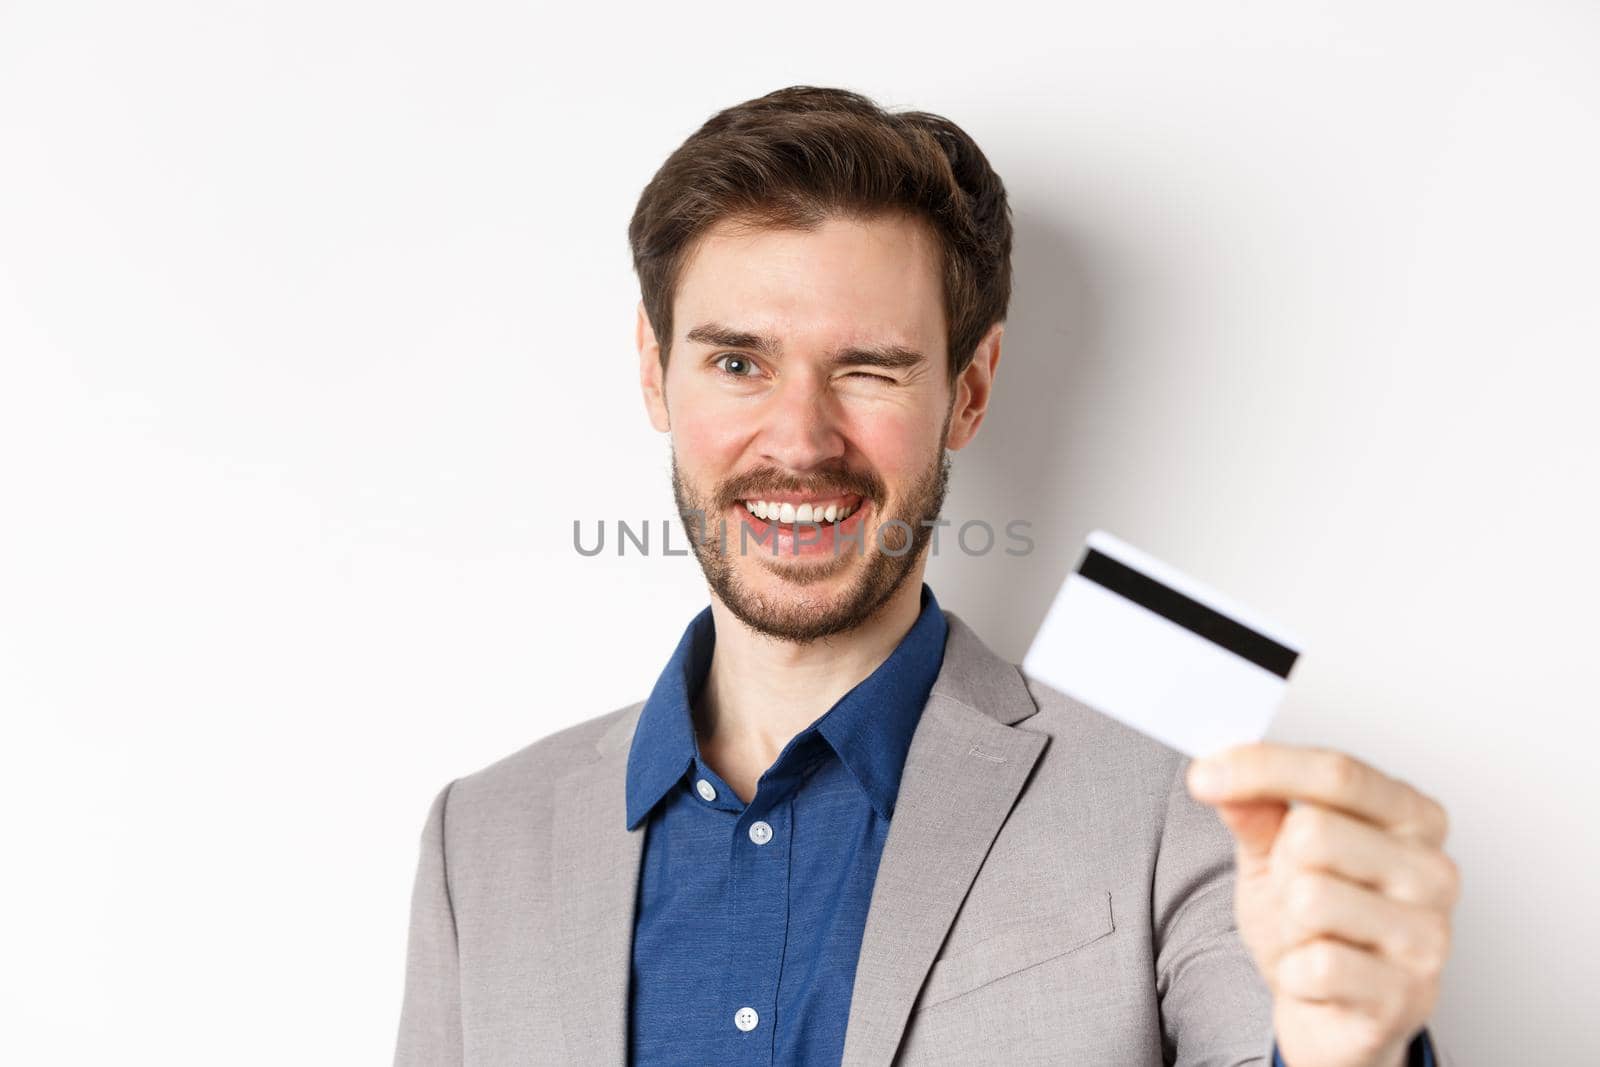 Shopping. Cheerful bearded guy in suit winking and smiling, showing plastic credit card at camera, white background.